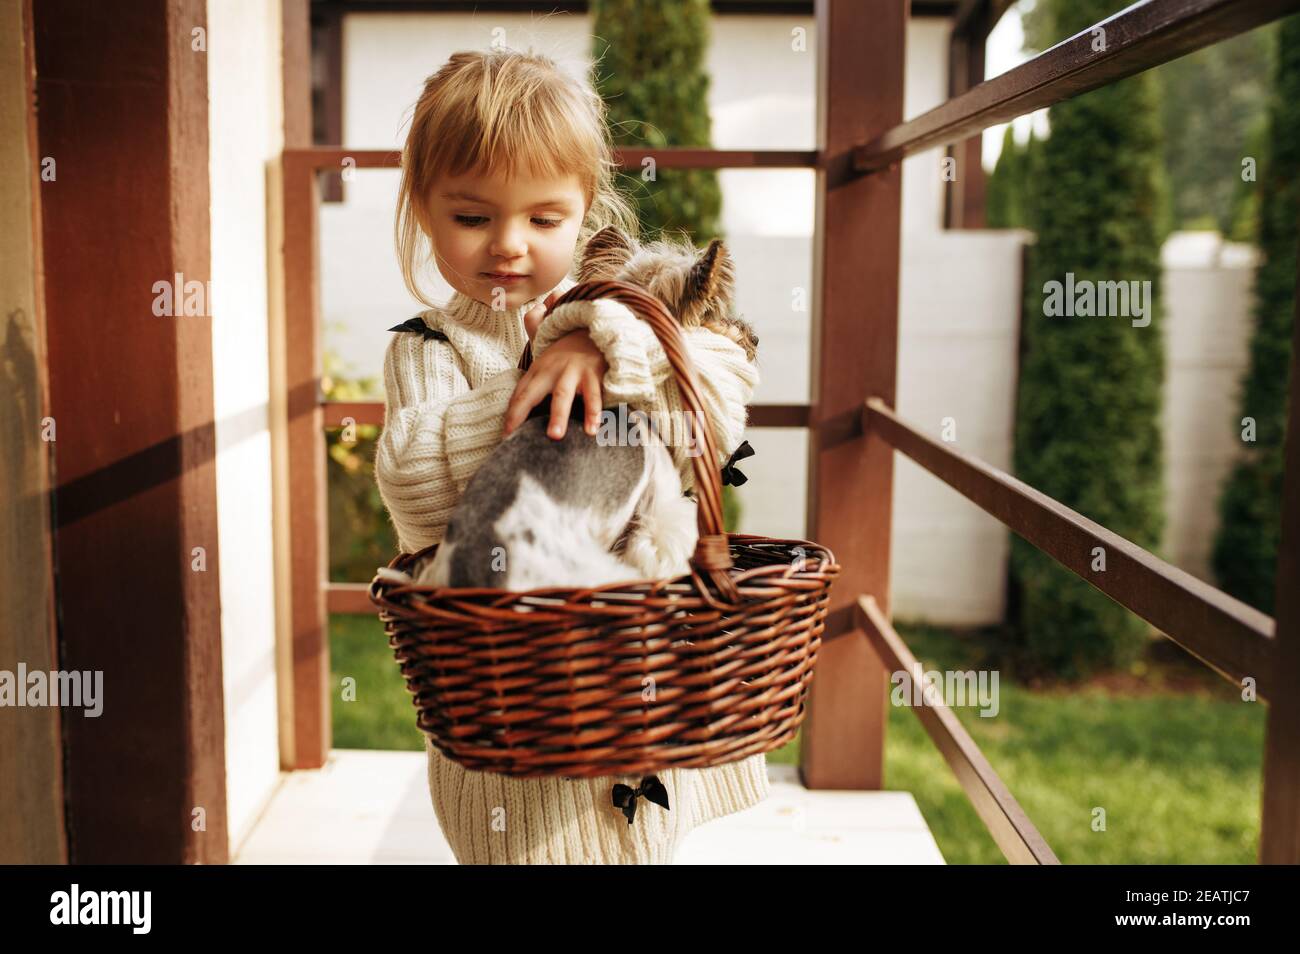 Kid with dog in basket are sitting on the stairs Stock Photo